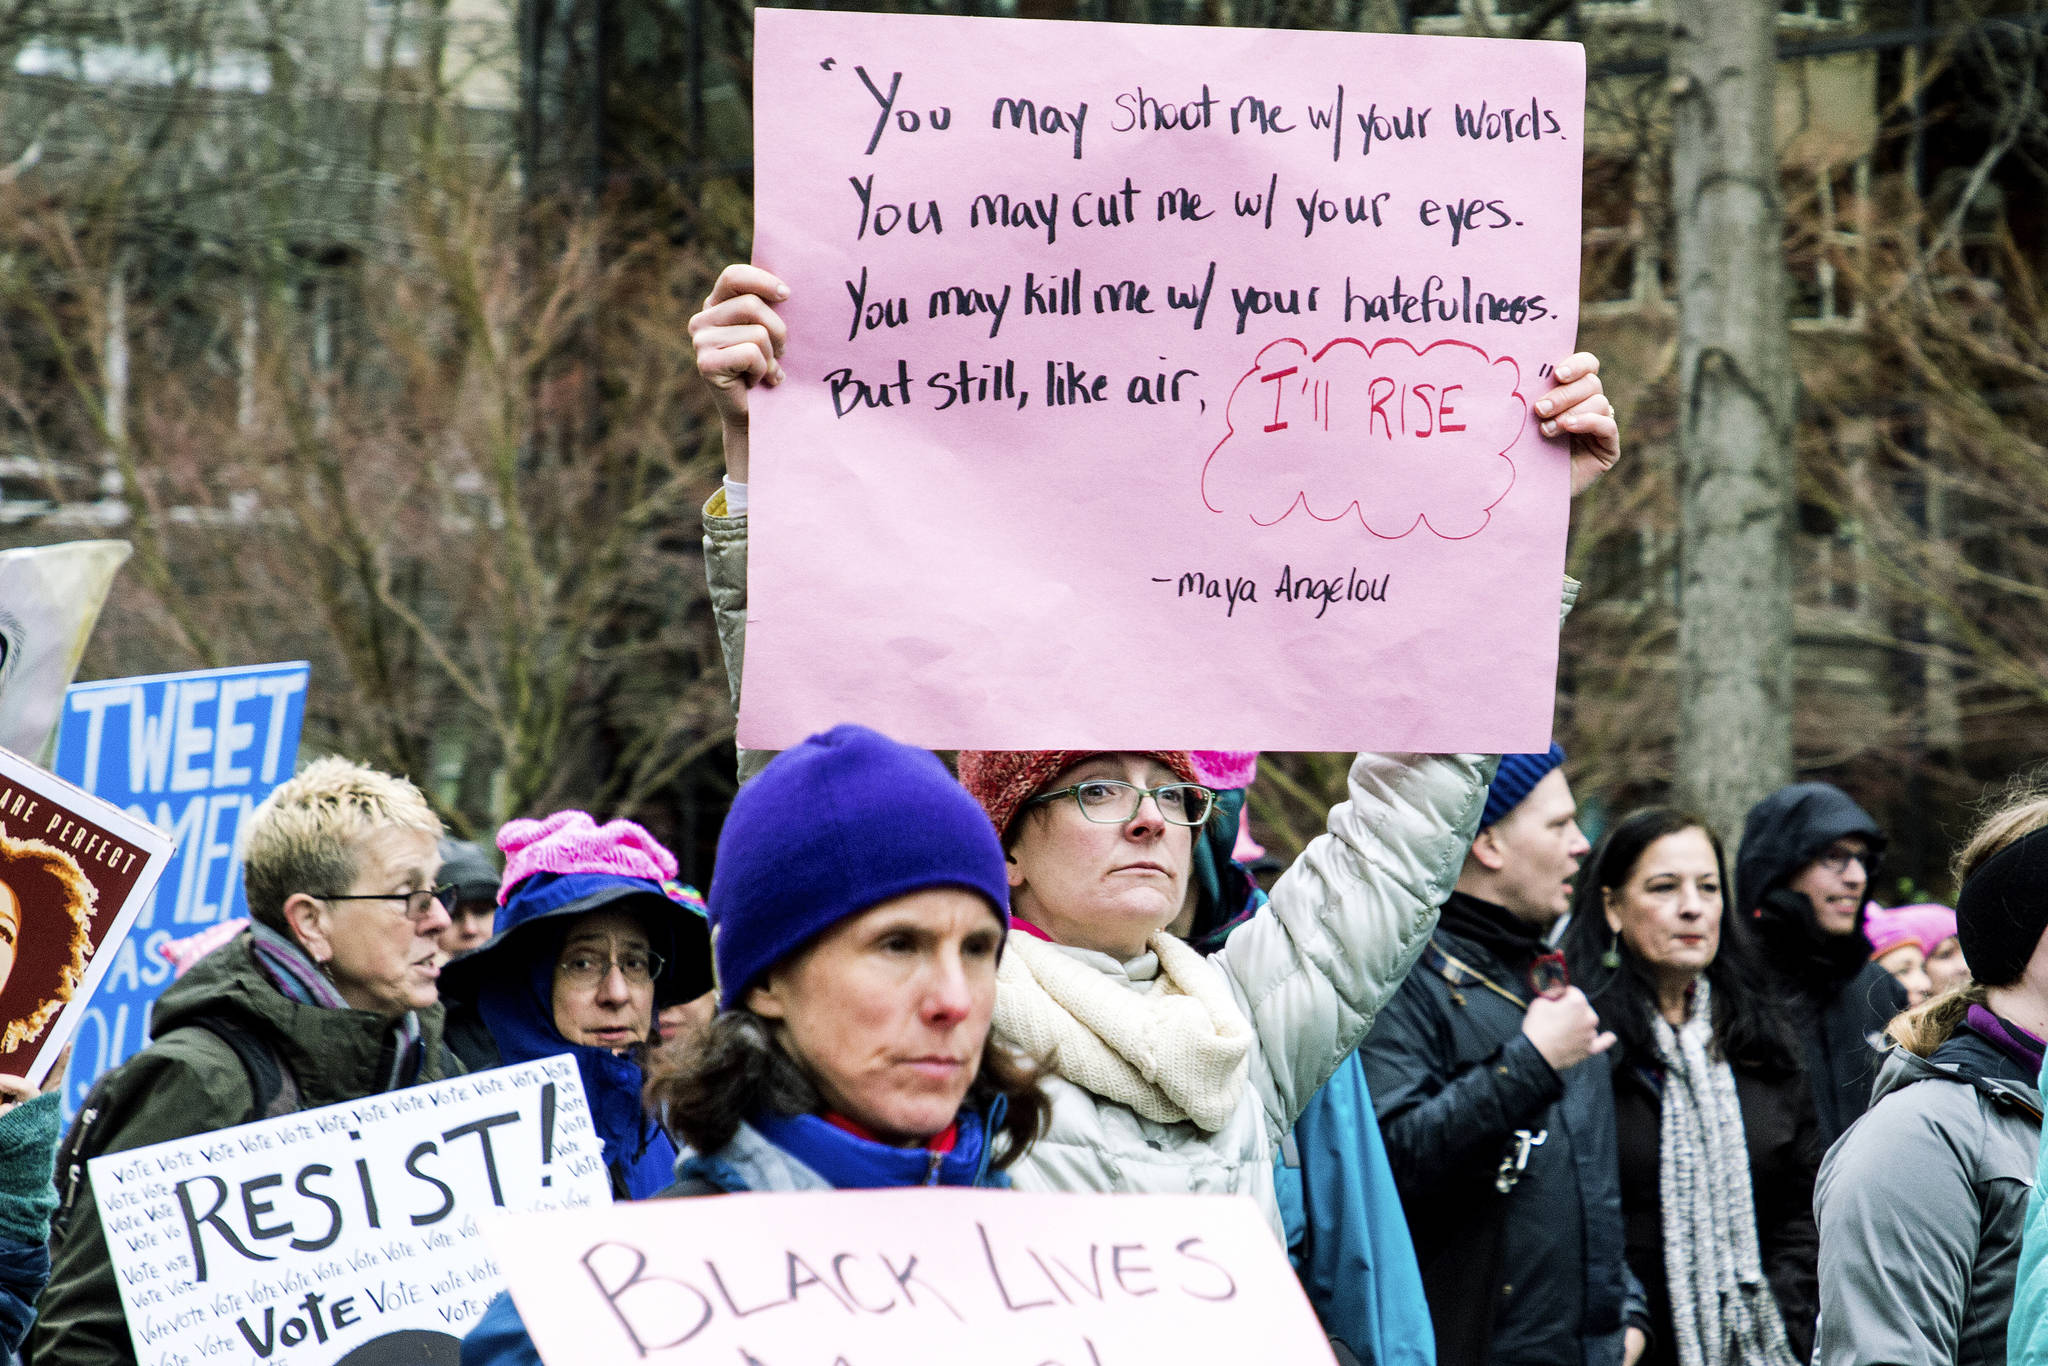 Only a handful of sexual harassment incidents are reported to the King County Human Resources Division every year, which County Councilmember Jeanne Kohl-Welles and others argue is due to underreporting. Photo from the 2018 Seattle Women’s March by Cindy Shebley/Flickr